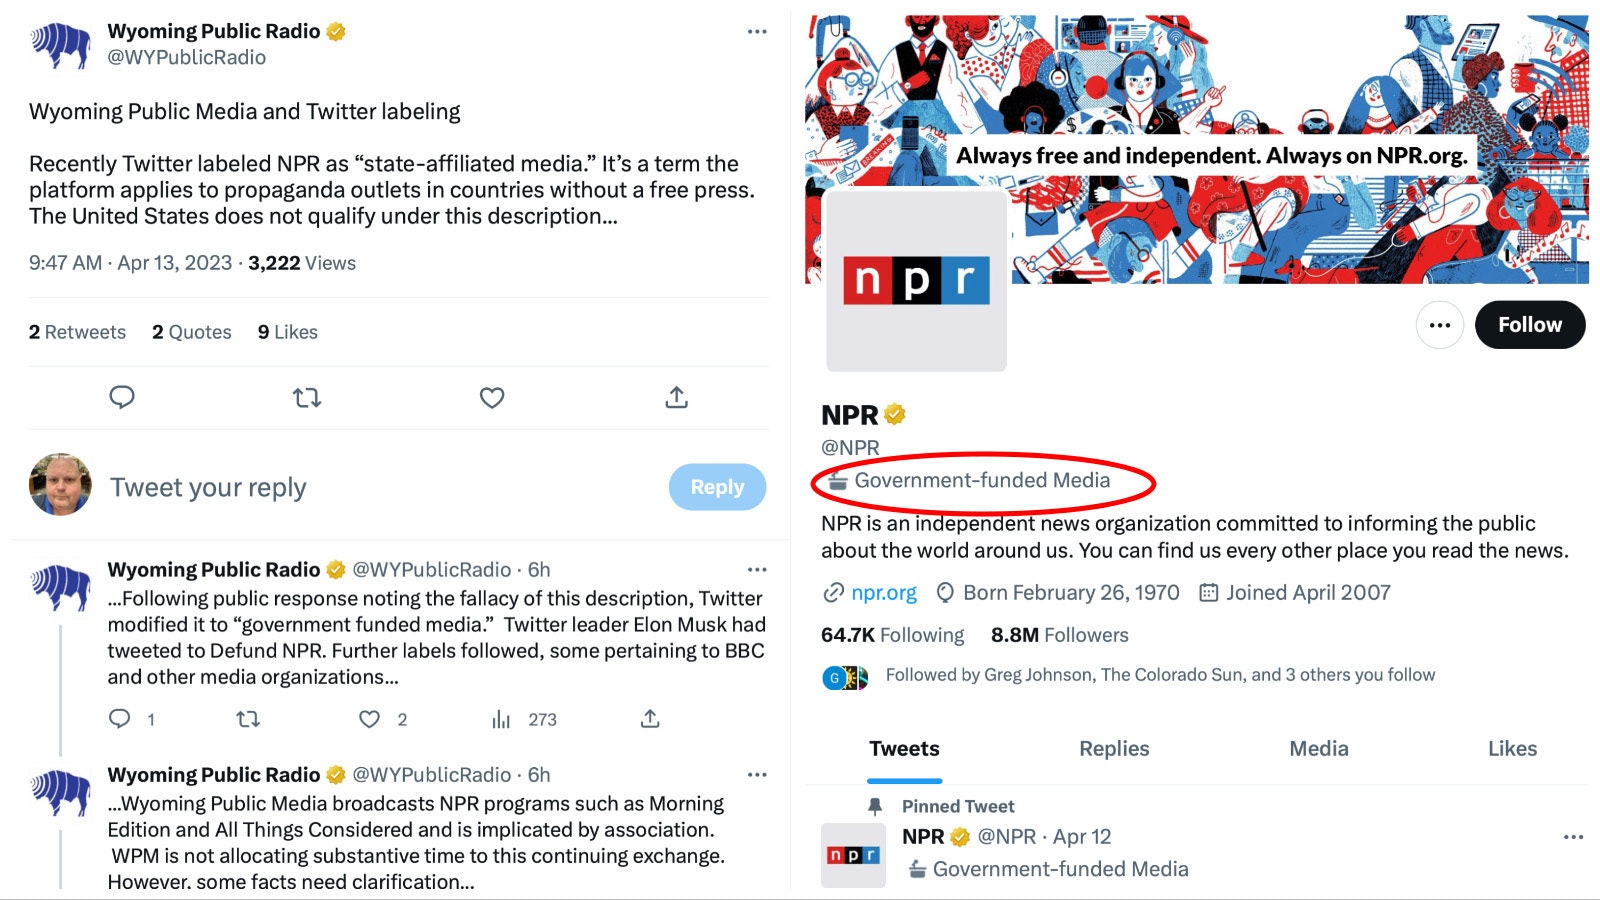 Twitter and NPR 2 4 13 23